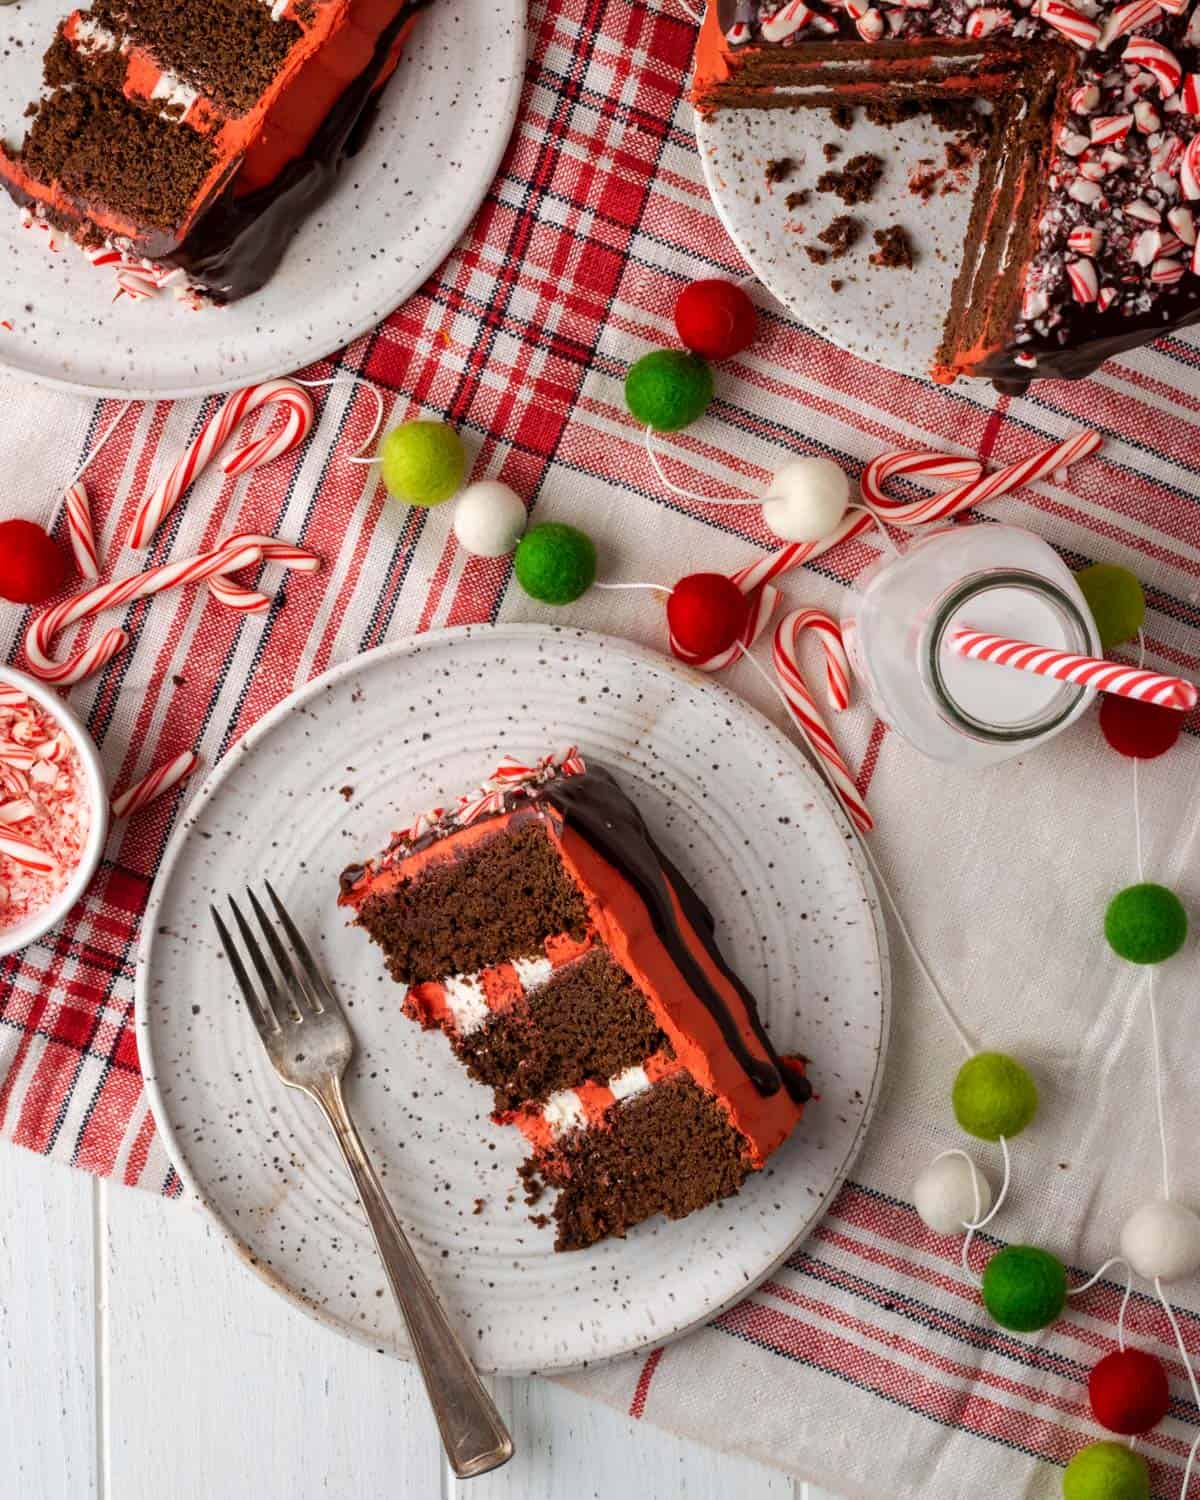 Two slices of chocolate peppermint cake on a tabletop decorated with red and green baubles.